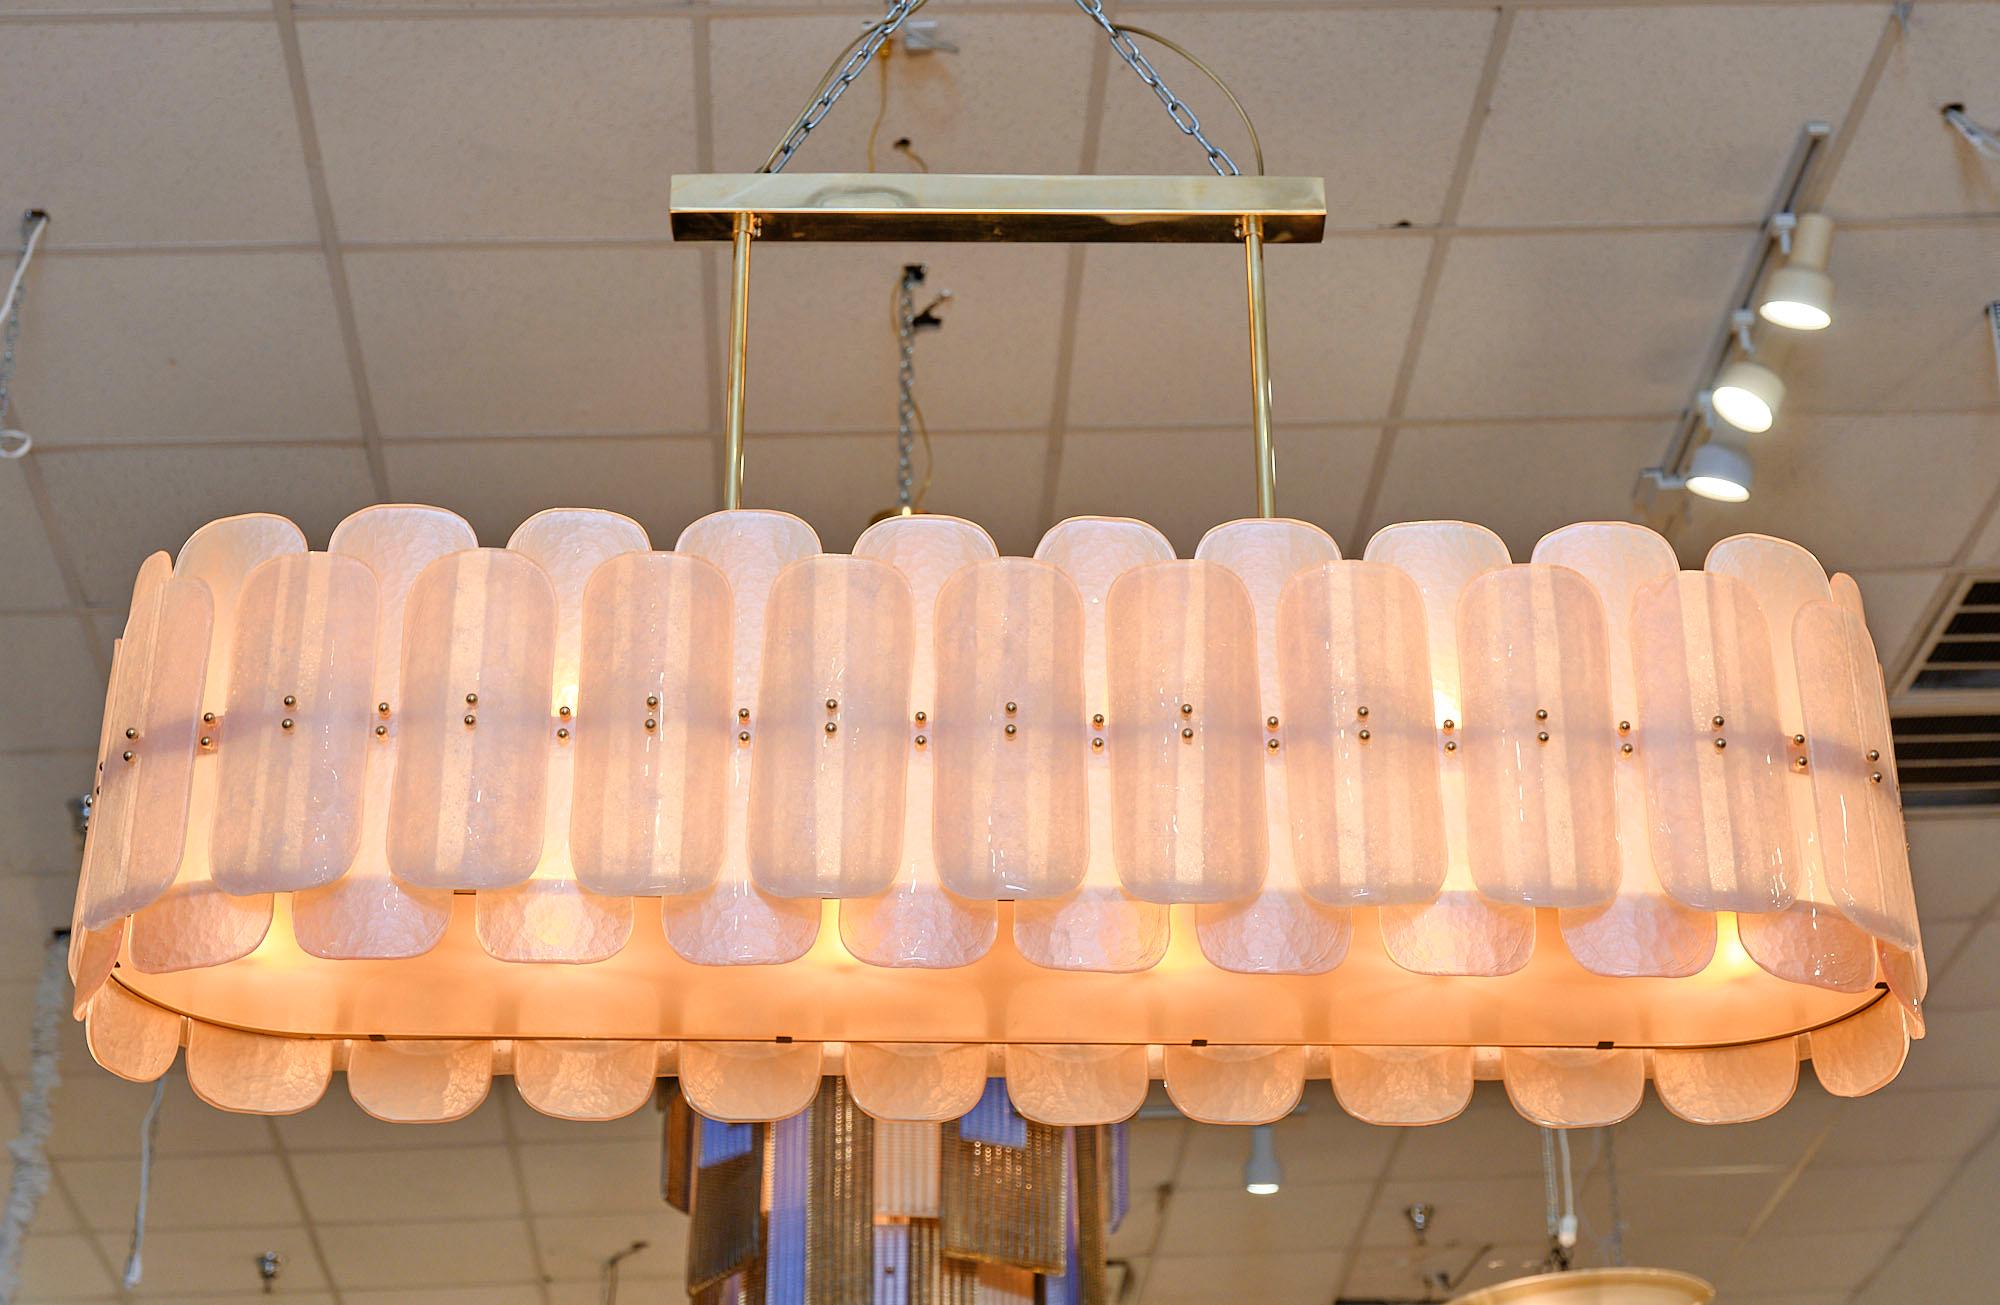 Chandelier from the island of Murano featuring a gilt brass structure supporting an array of pink textured glass components. All of the glass is hand-blown in Italy. It has been newly wired to fit US standards.

This fixture is a special order from